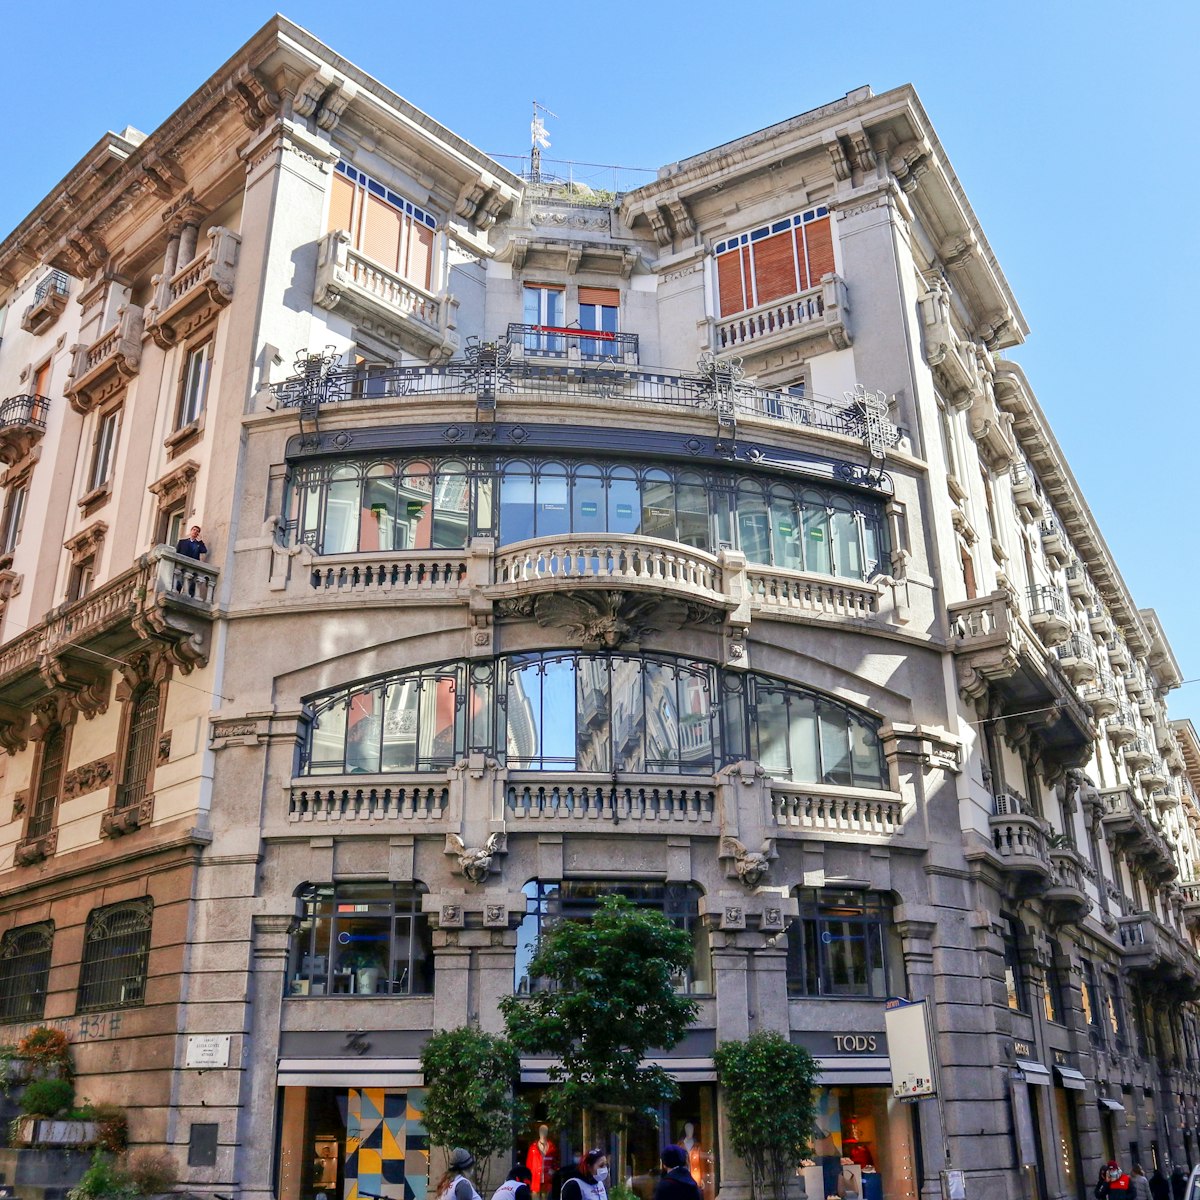 Naples, Campania, Italy - February 16, 2021: Early 20th century Art Nouveau building seen from Via dei Mille; Shutterstock ID 1936147015; purchase_order: 65050; job: poi; client: ; other:
1936147015
alley, architecture, building, campania, chiaia, chiaia district, city, culture, entrance, exterior, facade, ferlaino, historic, historic center, italy, largo luisa conte, monumental, naples, outdoor, palace, palazzo mannajuolo, pedestrian, pedestrianized street, people, residential, shopping, stained glass, staircase, stairway, stately, street, terrace, tourism, tourists, town, twentieth century, urban, via dei mille, via filangieri, windows